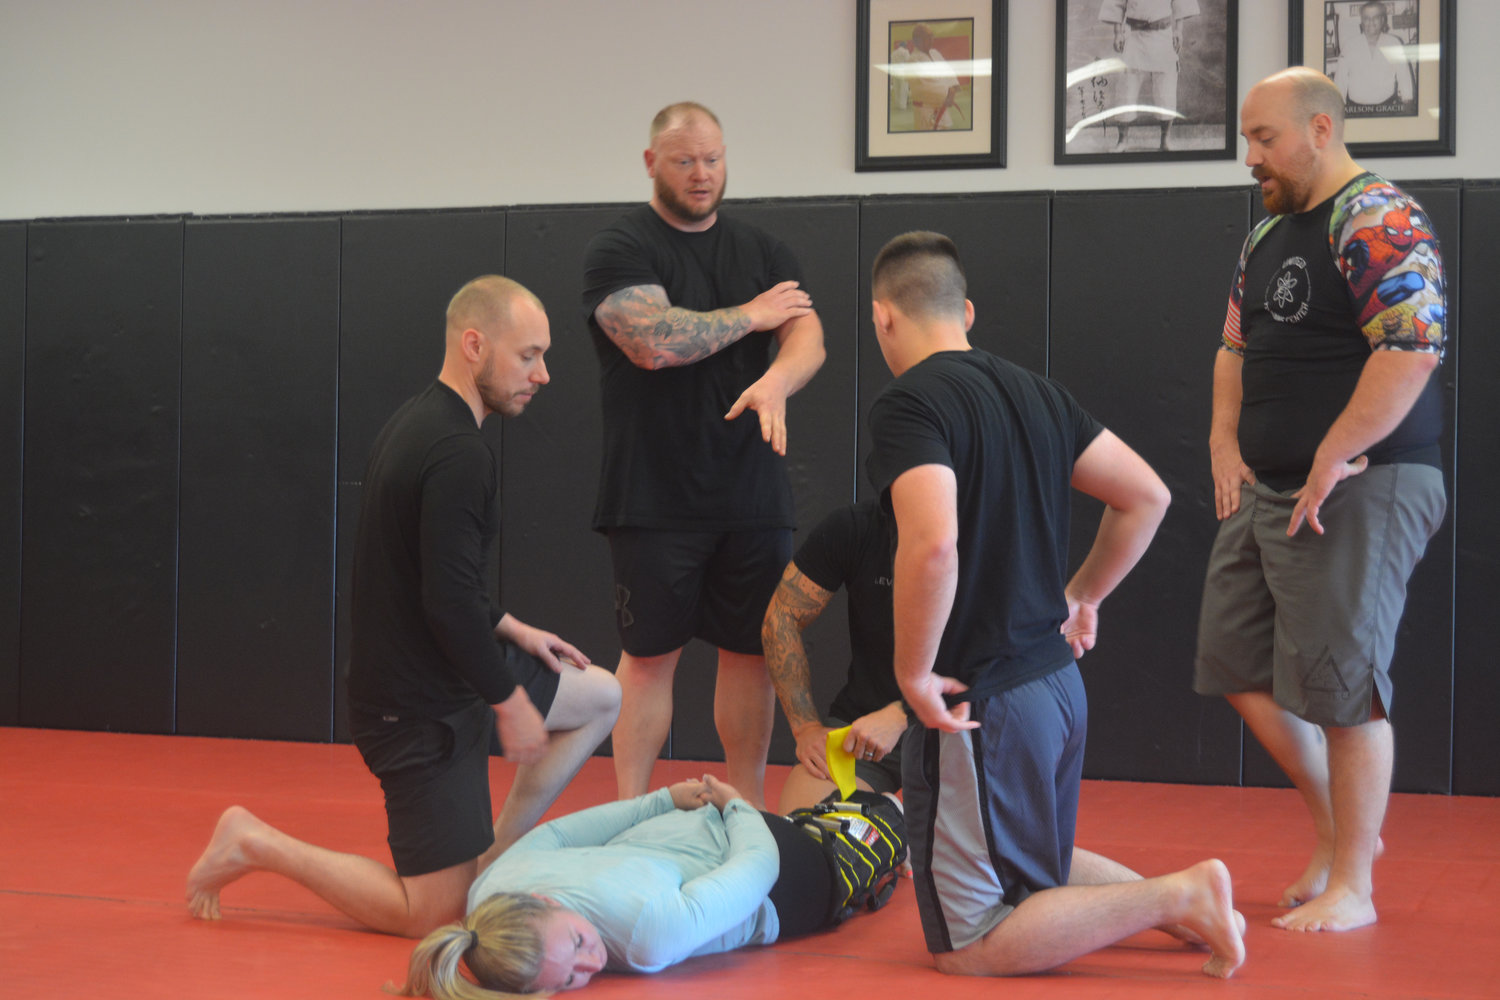 Members of the Yelm Police Department receive instructions on how to properly perform the “wrap” technique at Harai Dojo.